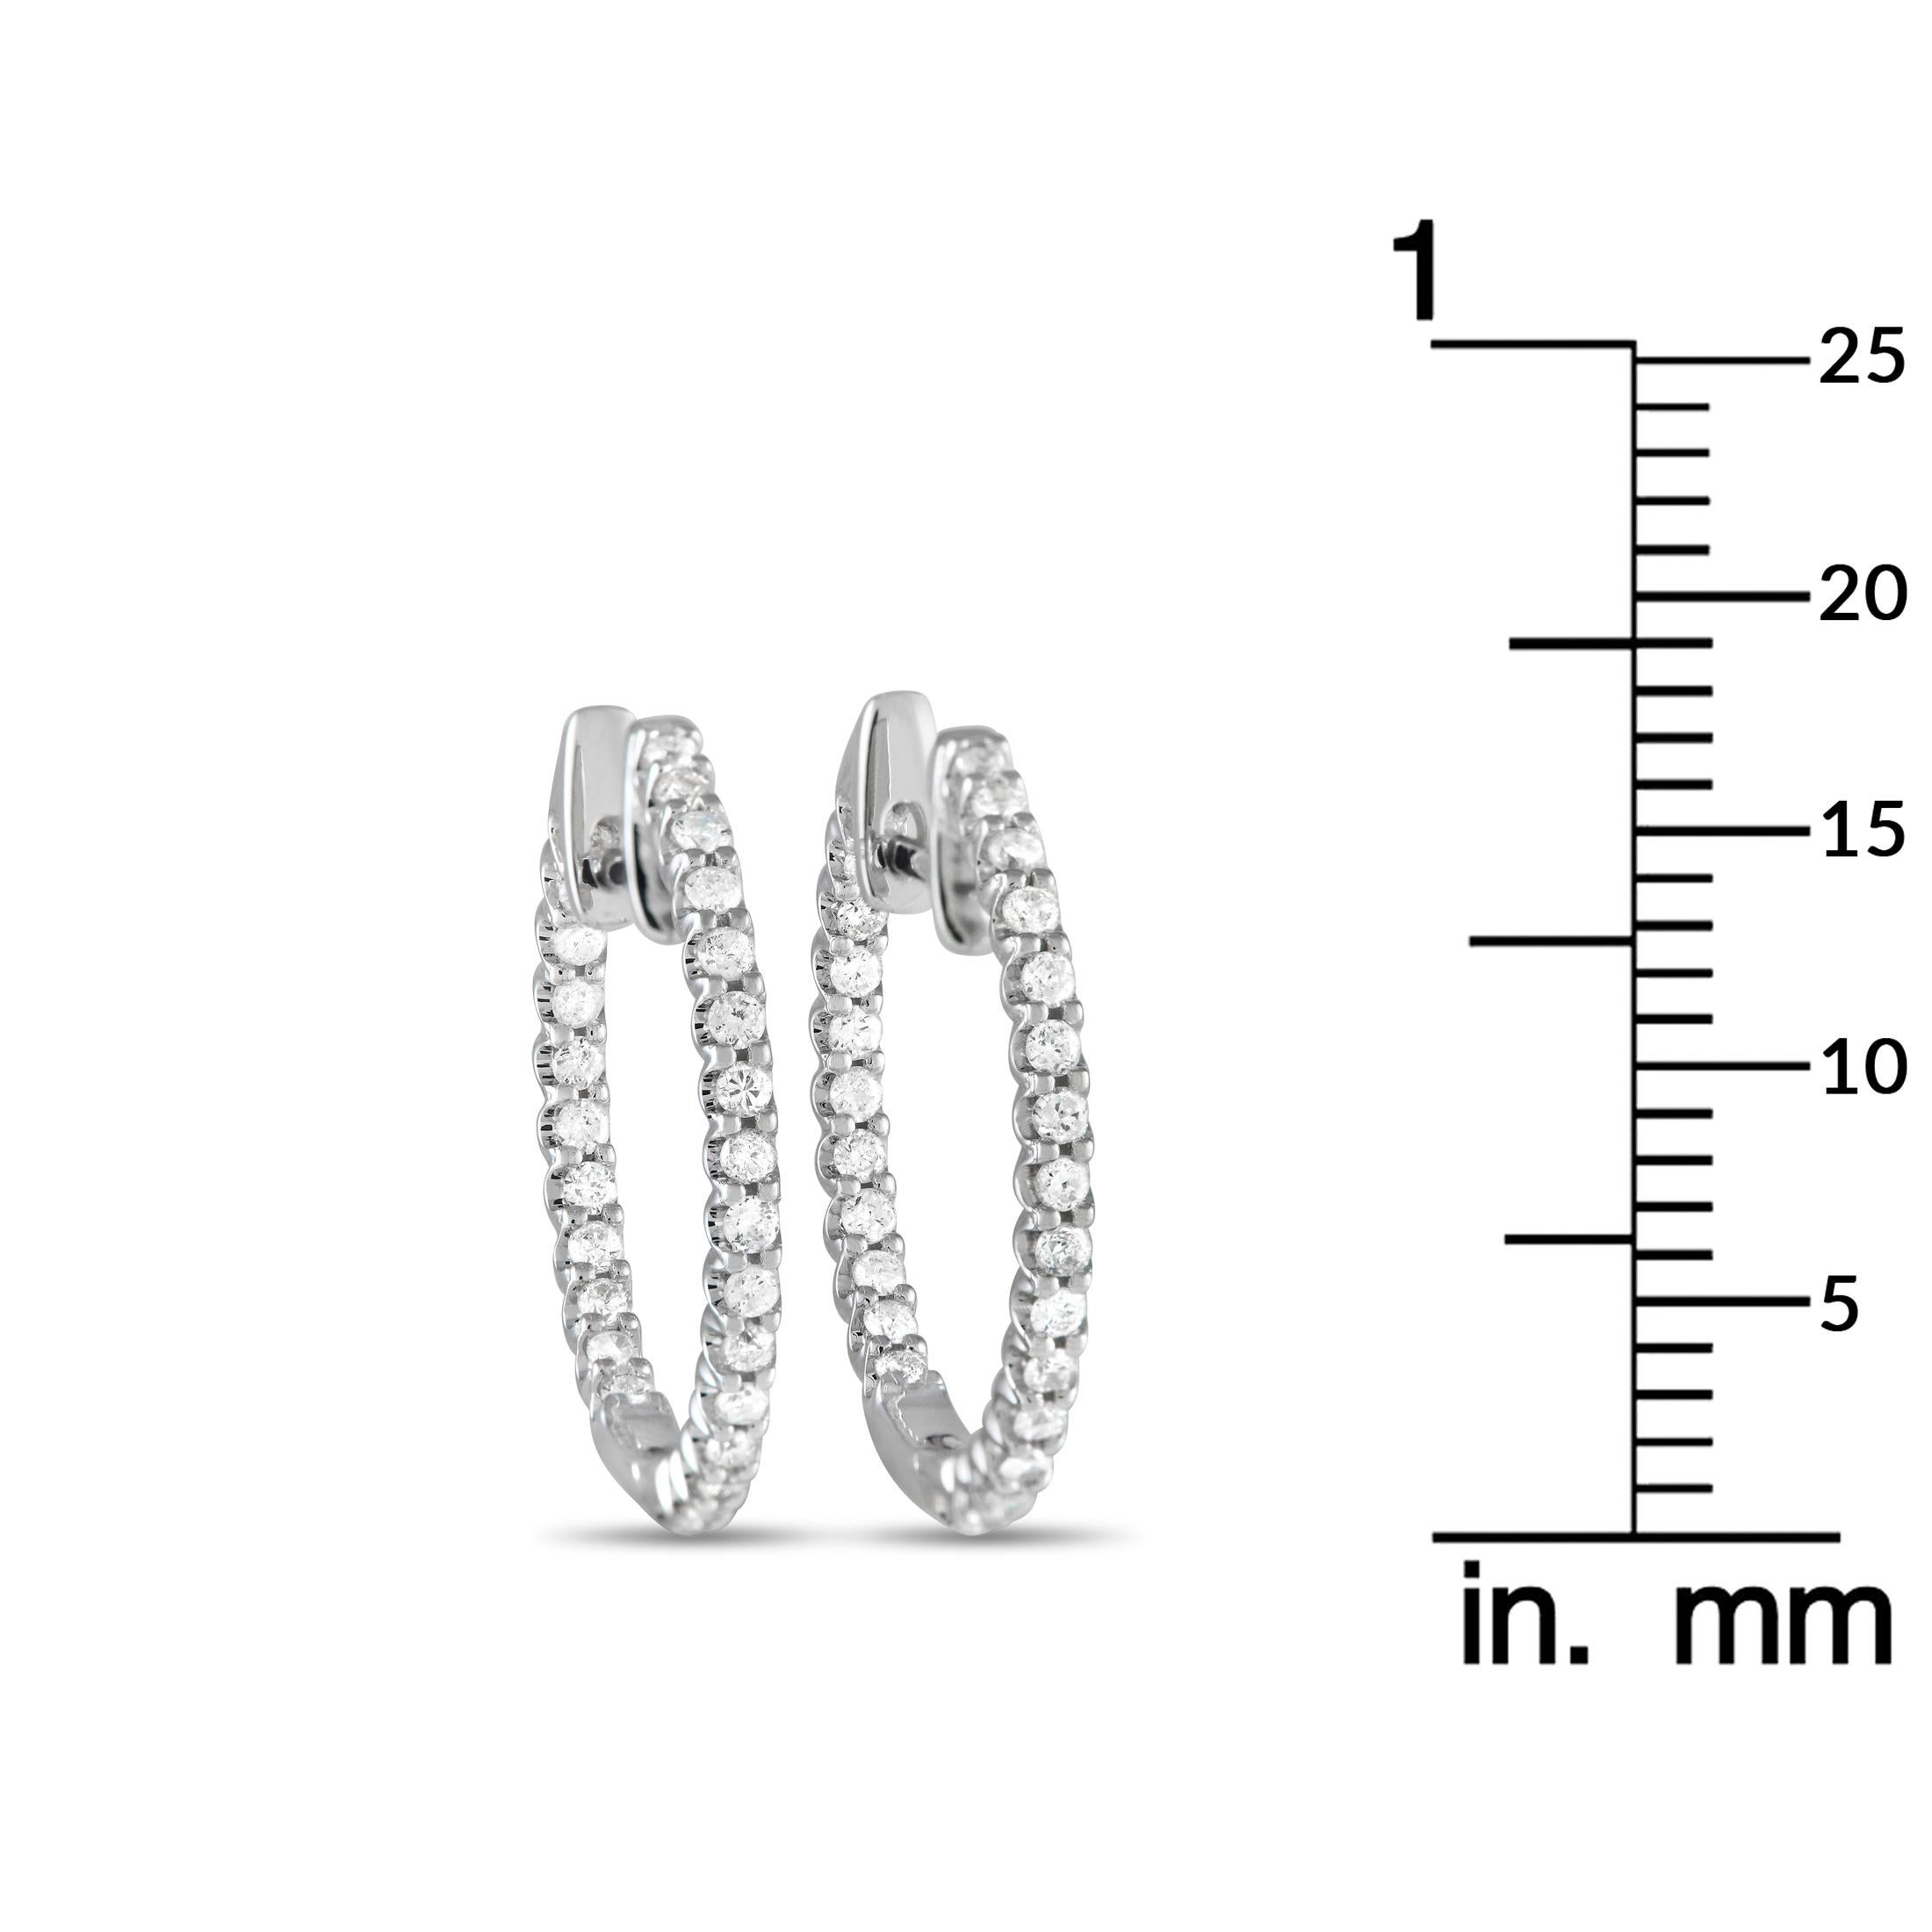 Diamonds totaling 0.42 carats located at both the front and rear of these hoop earrings allow them to sparkle from seemingly every angle. Stylish and incredibly refined, each one features a 14K White Gold setting that measures 0.70” round. 
 
 This